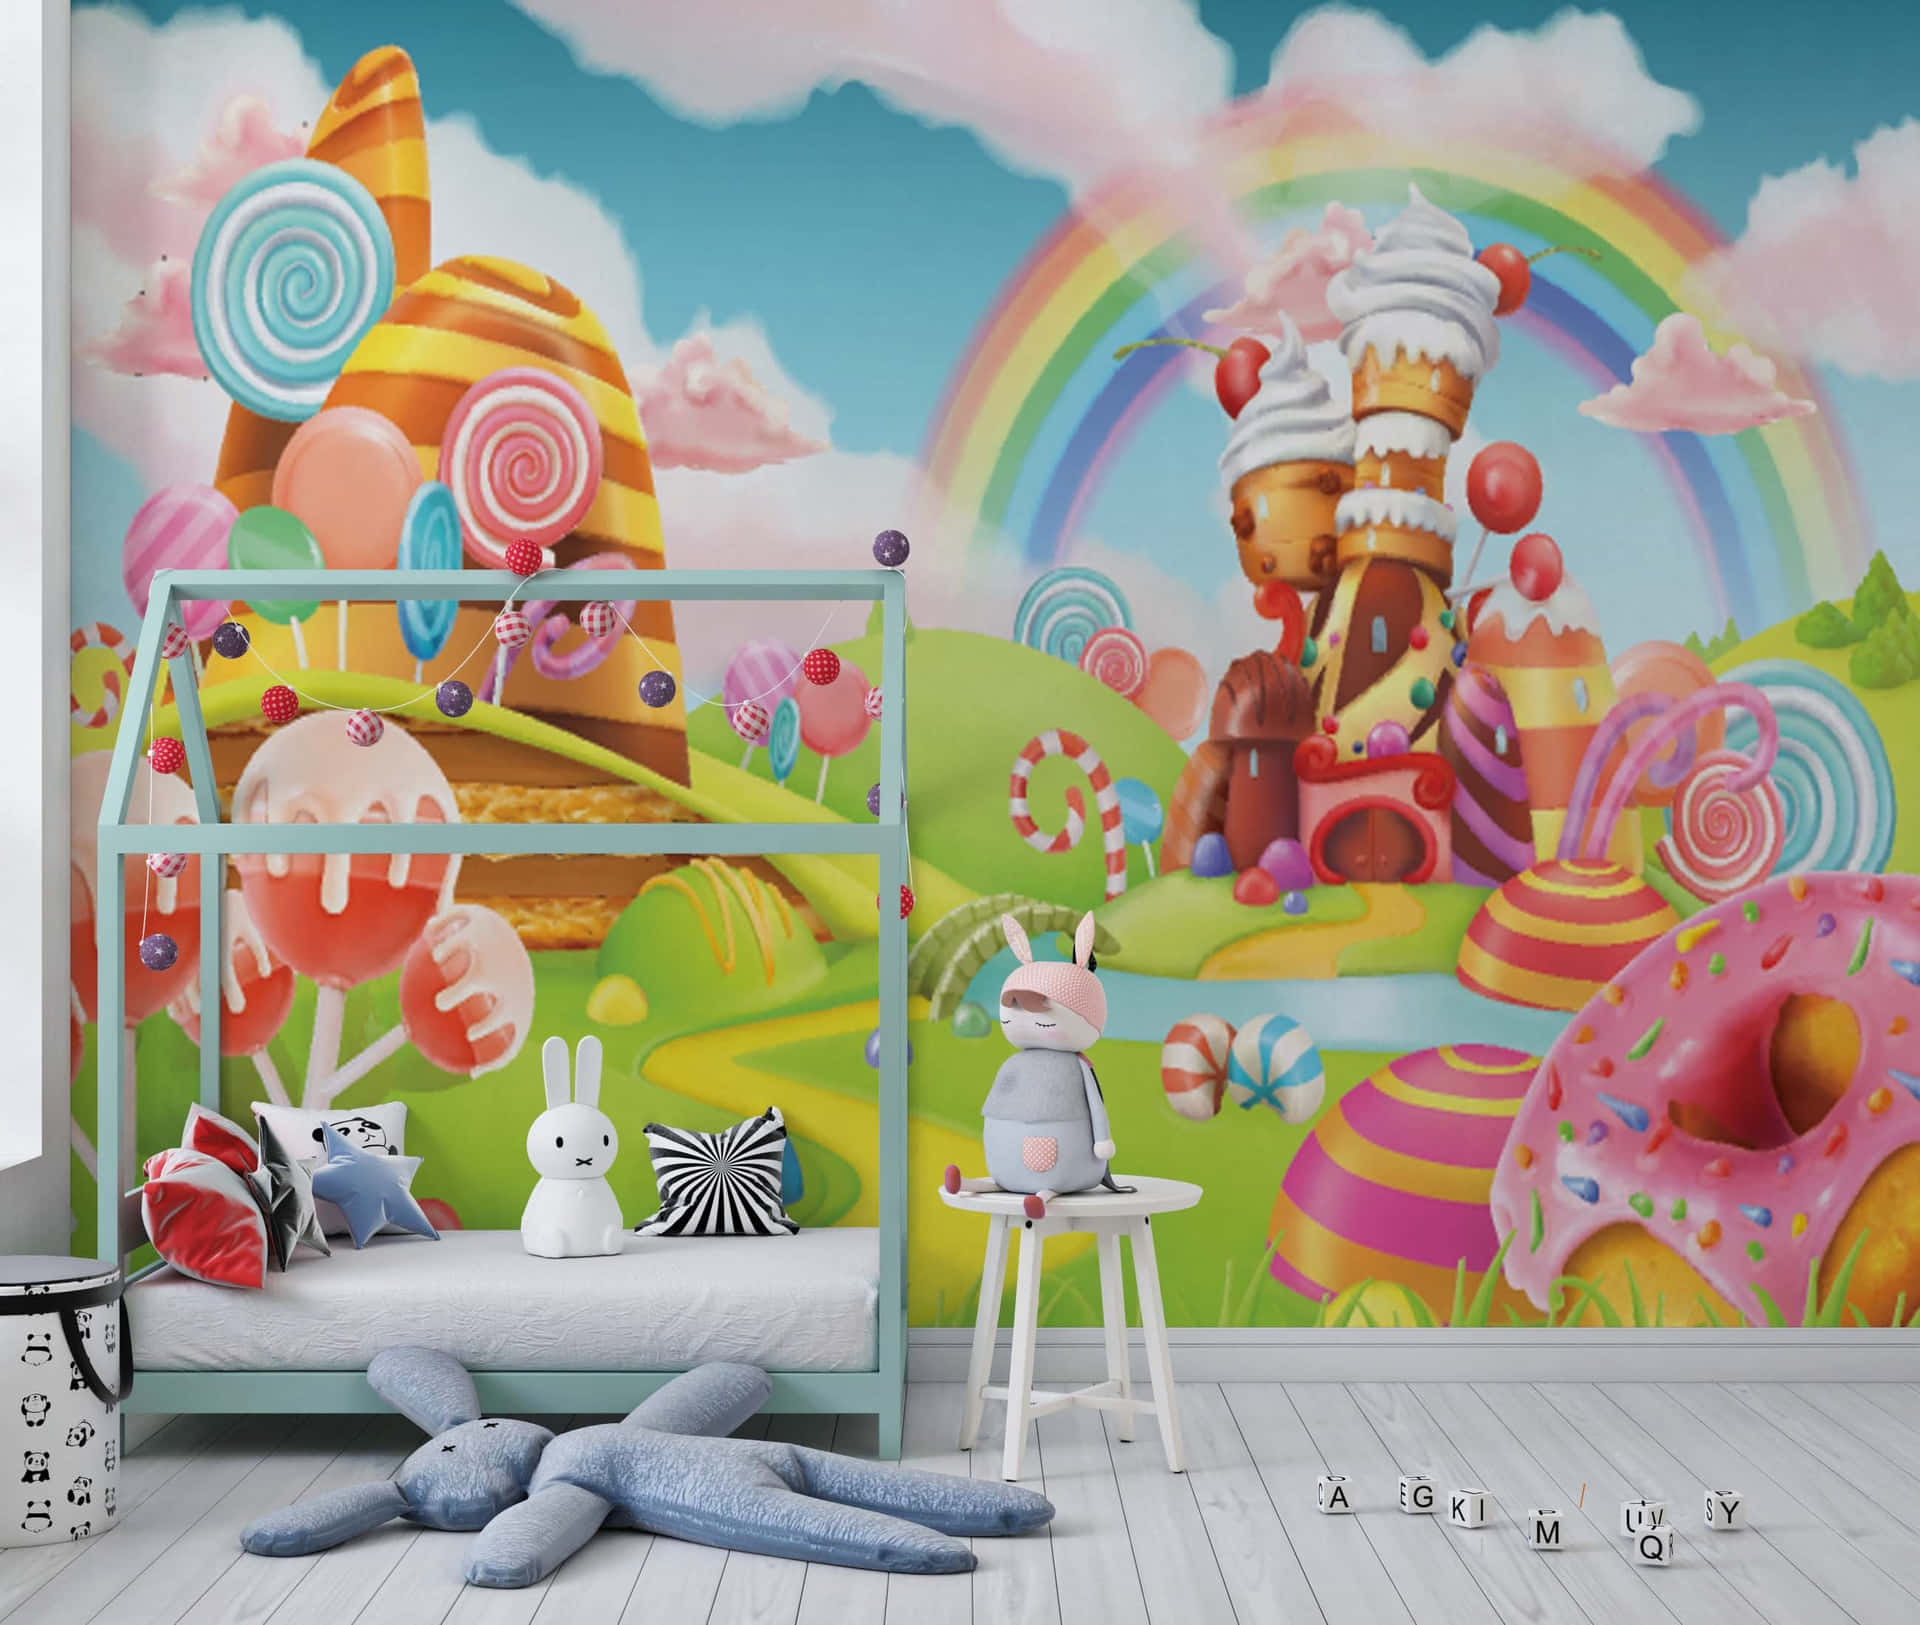 A Child's Bedroom With A Colorful Wall Mural Wallpaper